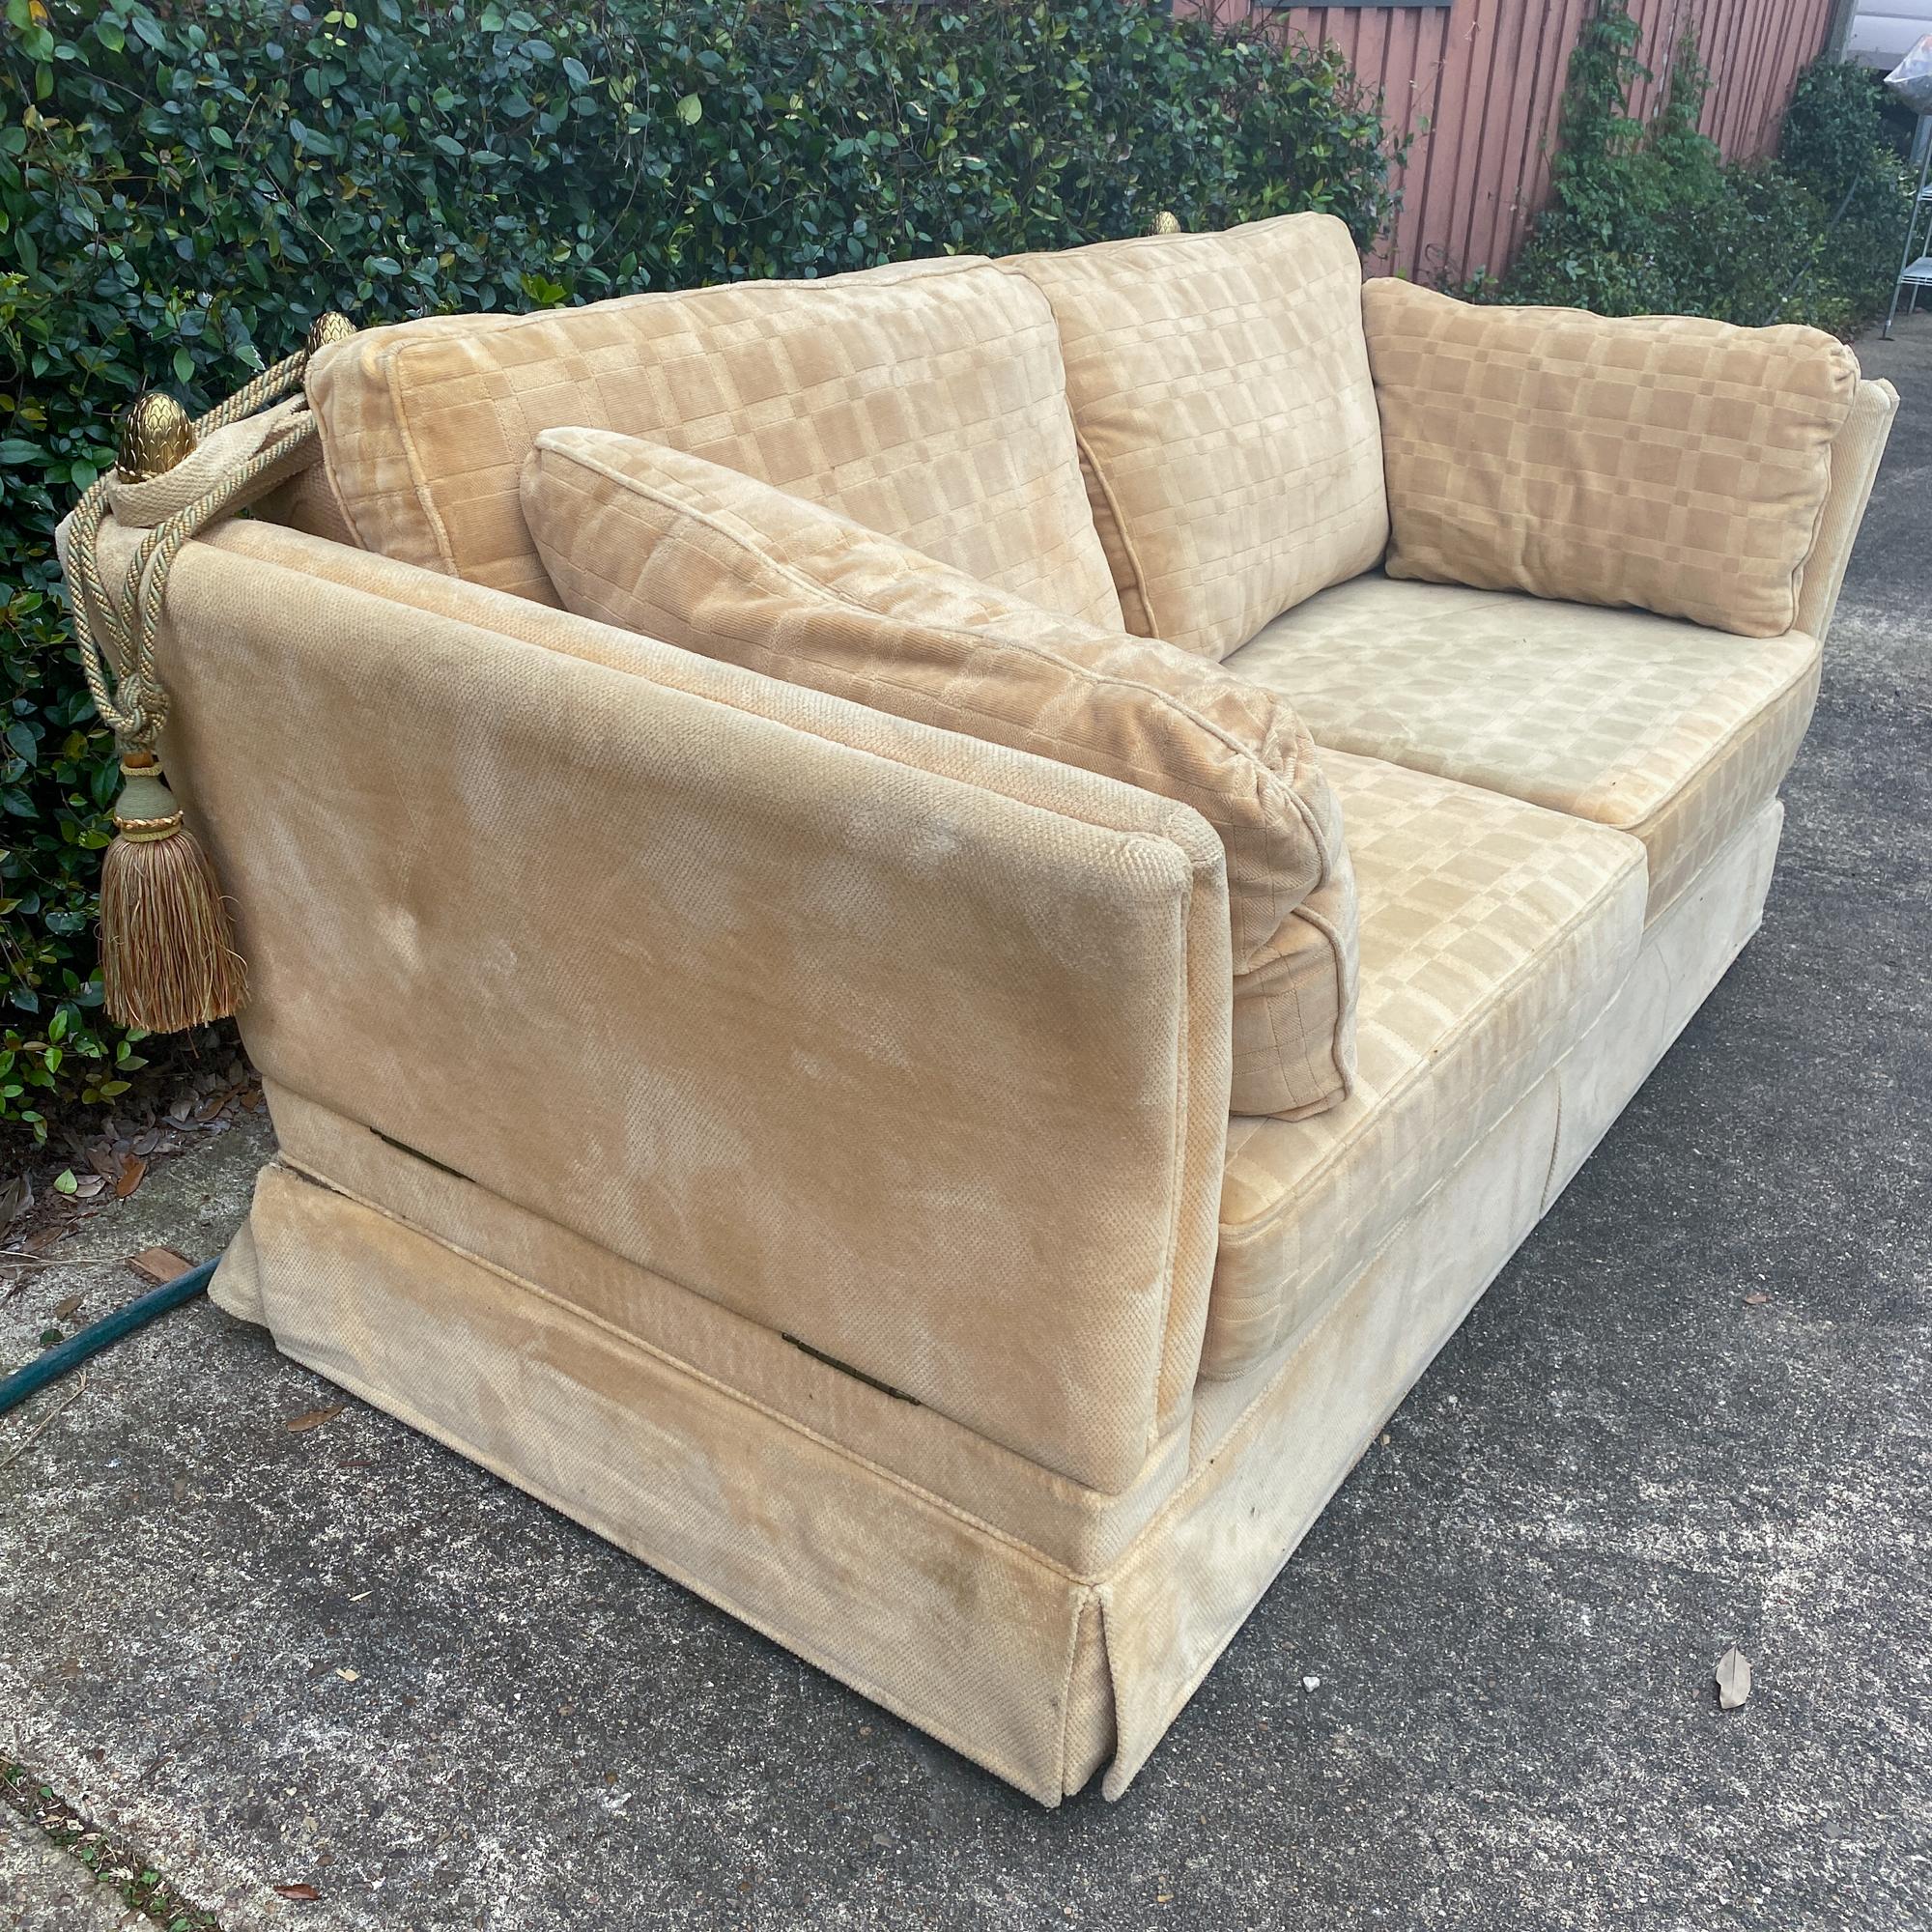 This is a 1970s era canapé sofa made in France, covered in creamy pale yellow velvet with adjustable arms, allowing conversion into a daybed. The piece has brass finial details at the corners of the back and arms to secure the arms in place with